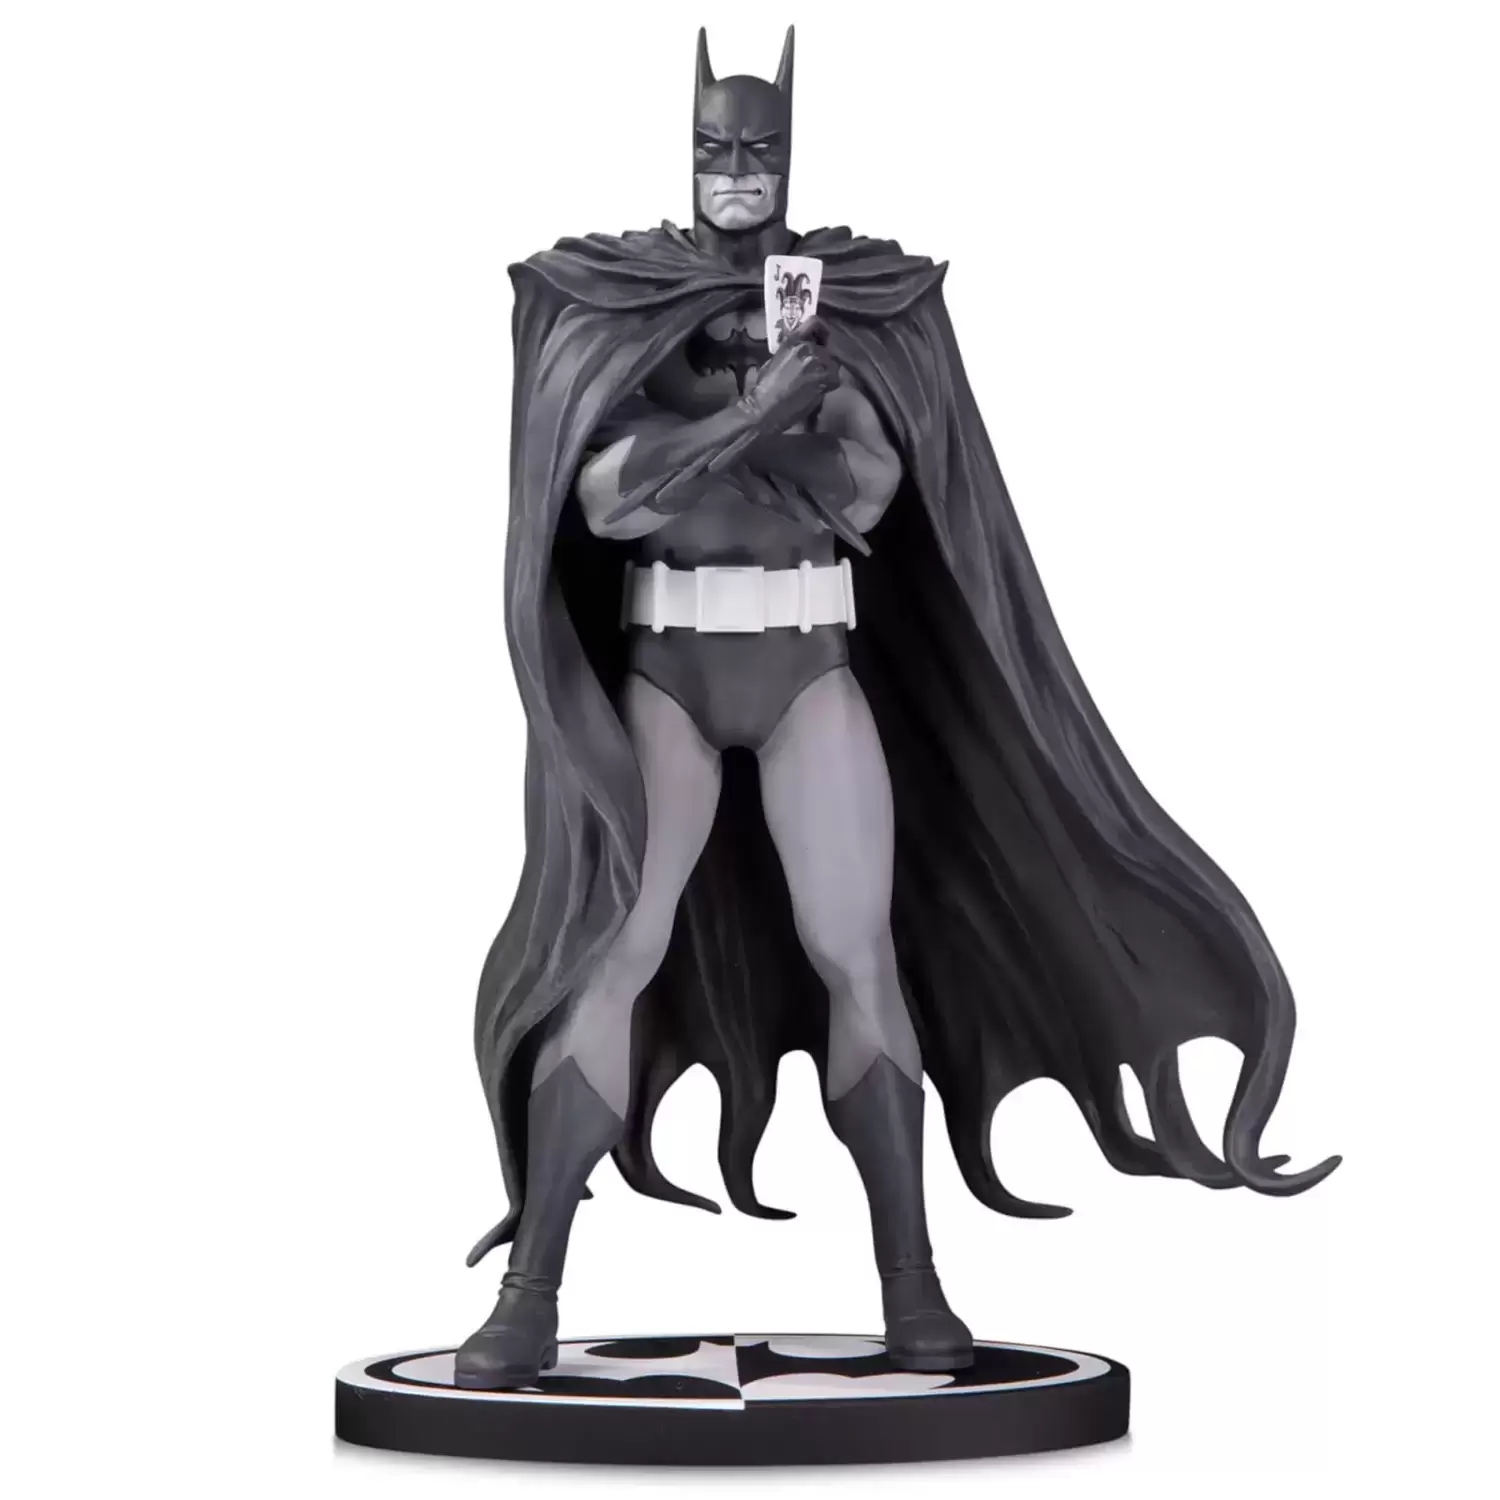 DC Collectibles Statues - Batman: Black and White by Brian Bolland - DC Direct